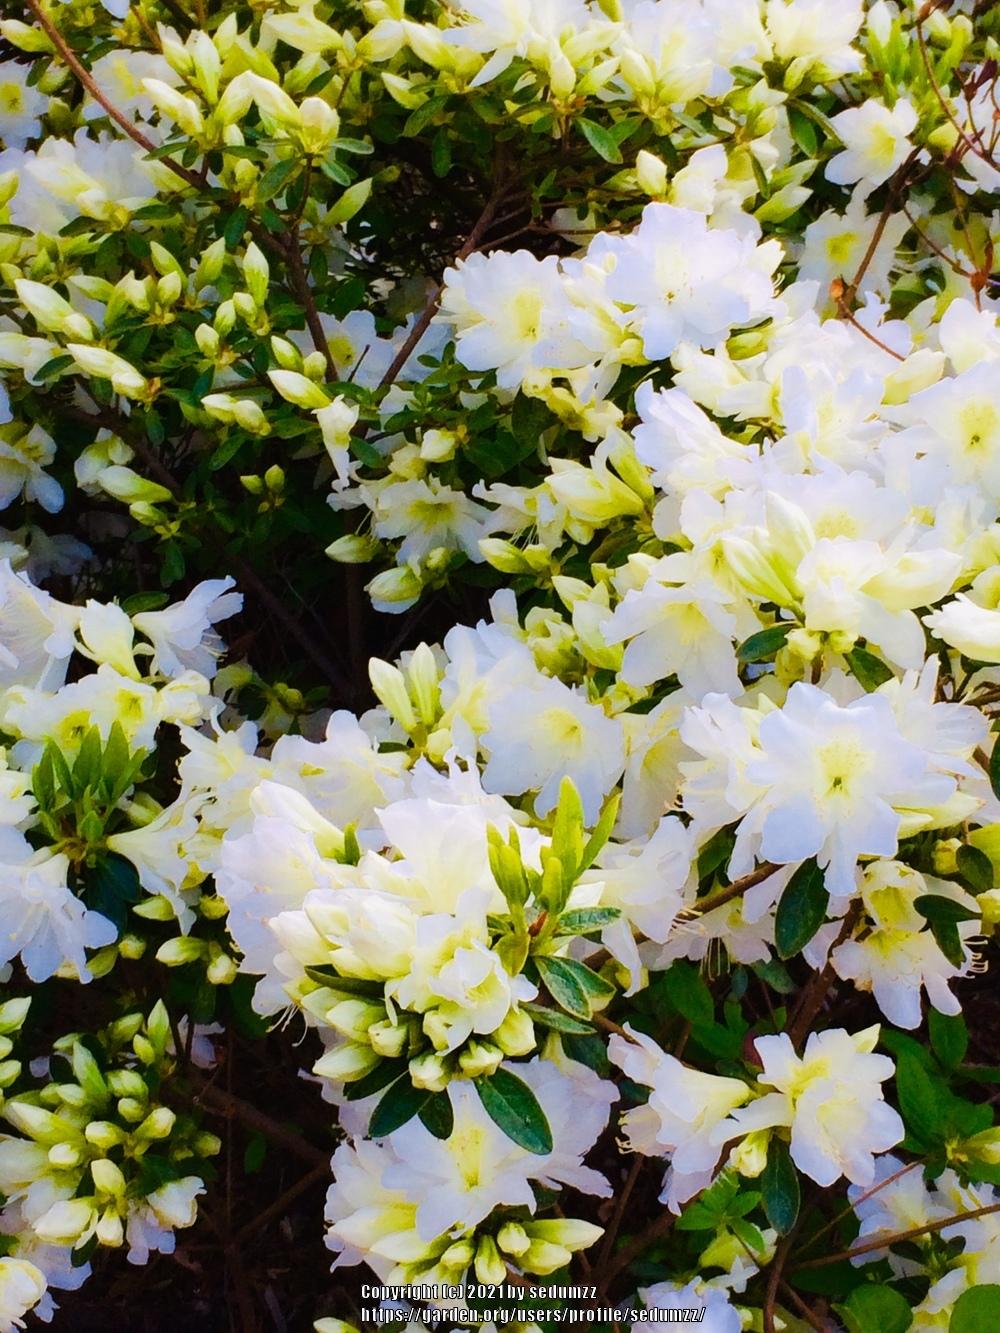 Photo of Rhododendrons (Rhododendron) uploaded by sedumzz